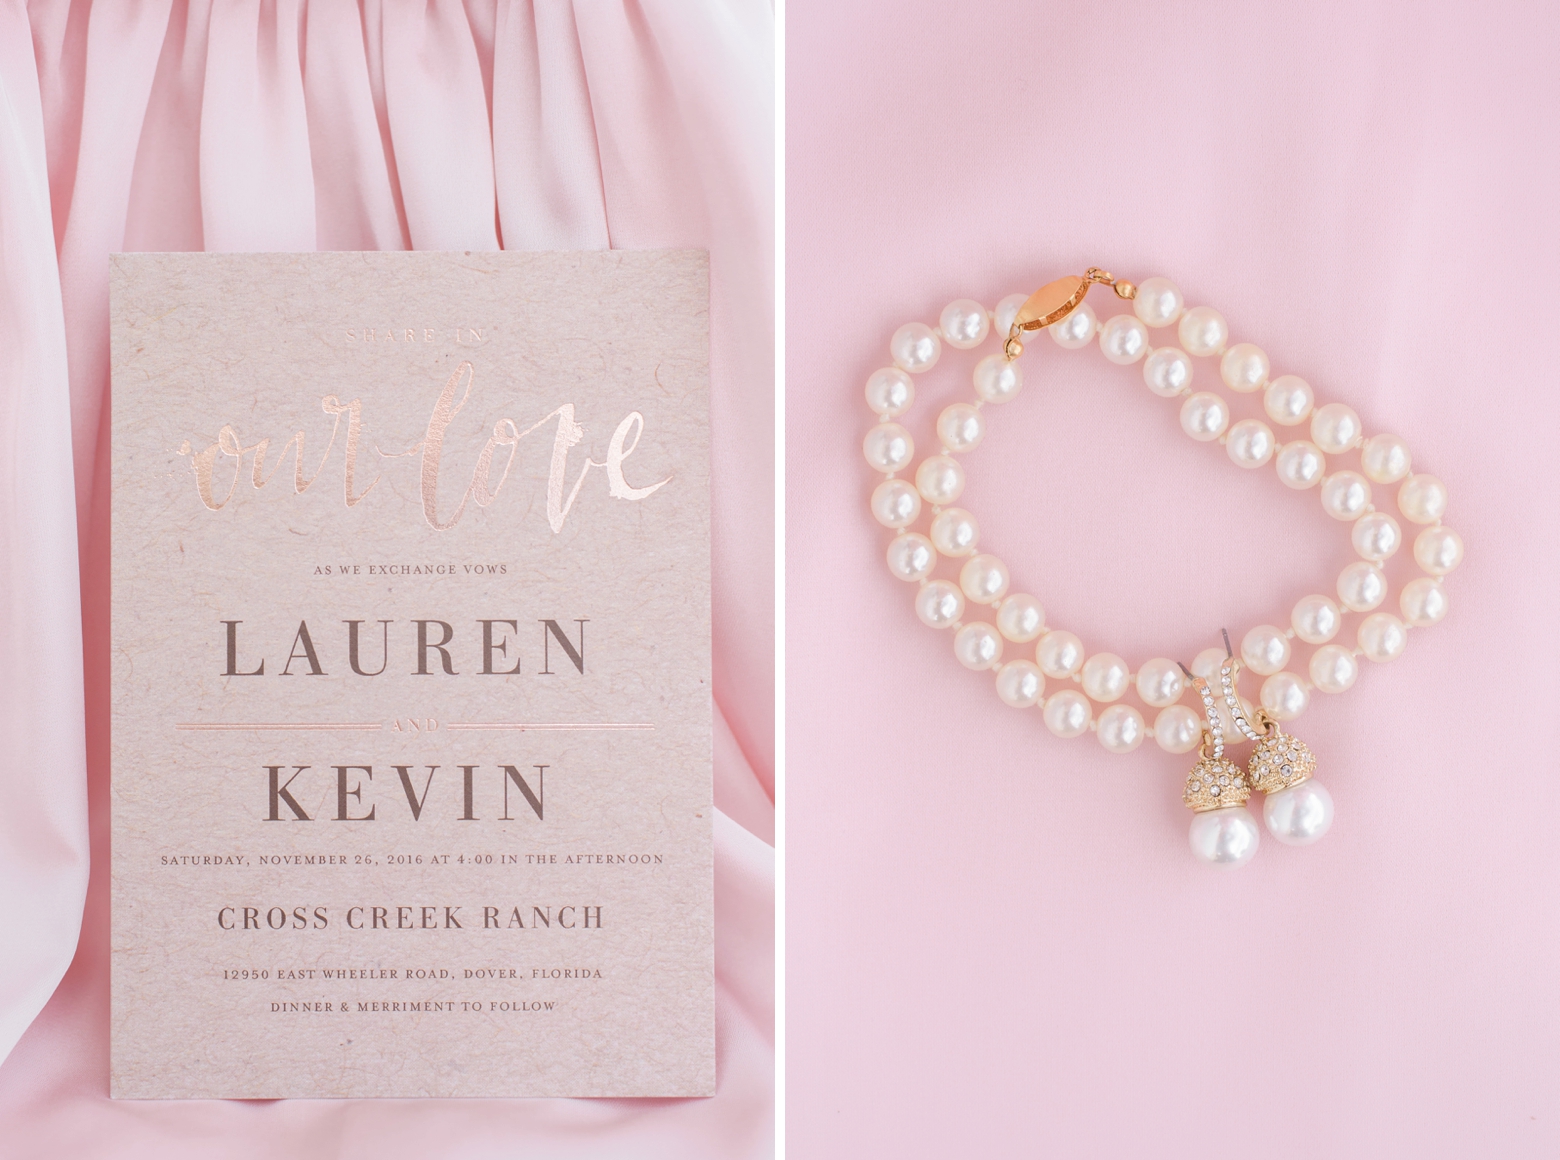 Wedding invitation and pearl bracelet against the pink of a dress